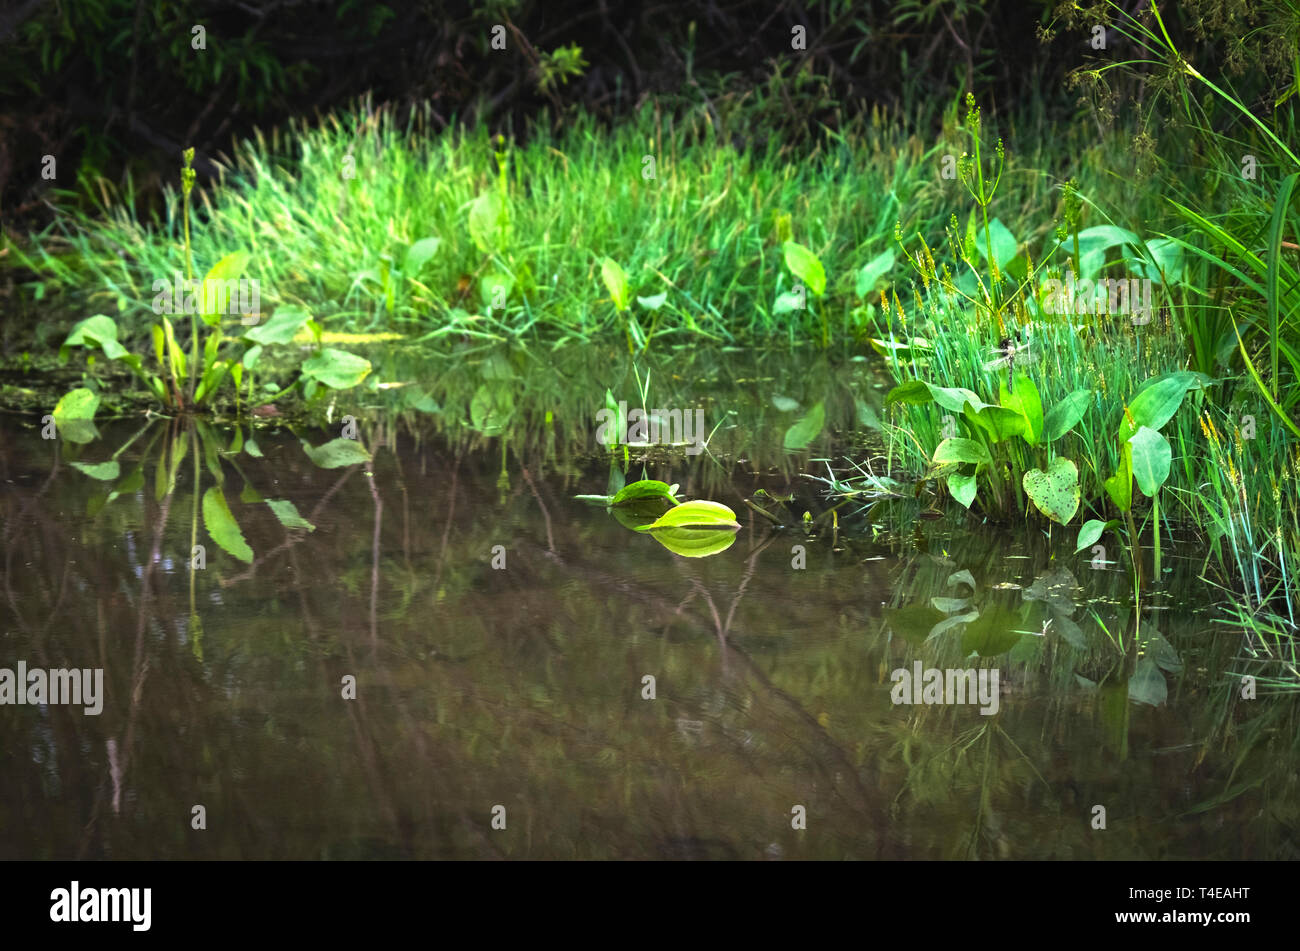 Overgrown River, Stream, Lake or Pond Shoreline with Grass and Waterweeds. Tree Branches Reflections. Monochoria Plants in Water. Fairy Tale Concept Stock Photo